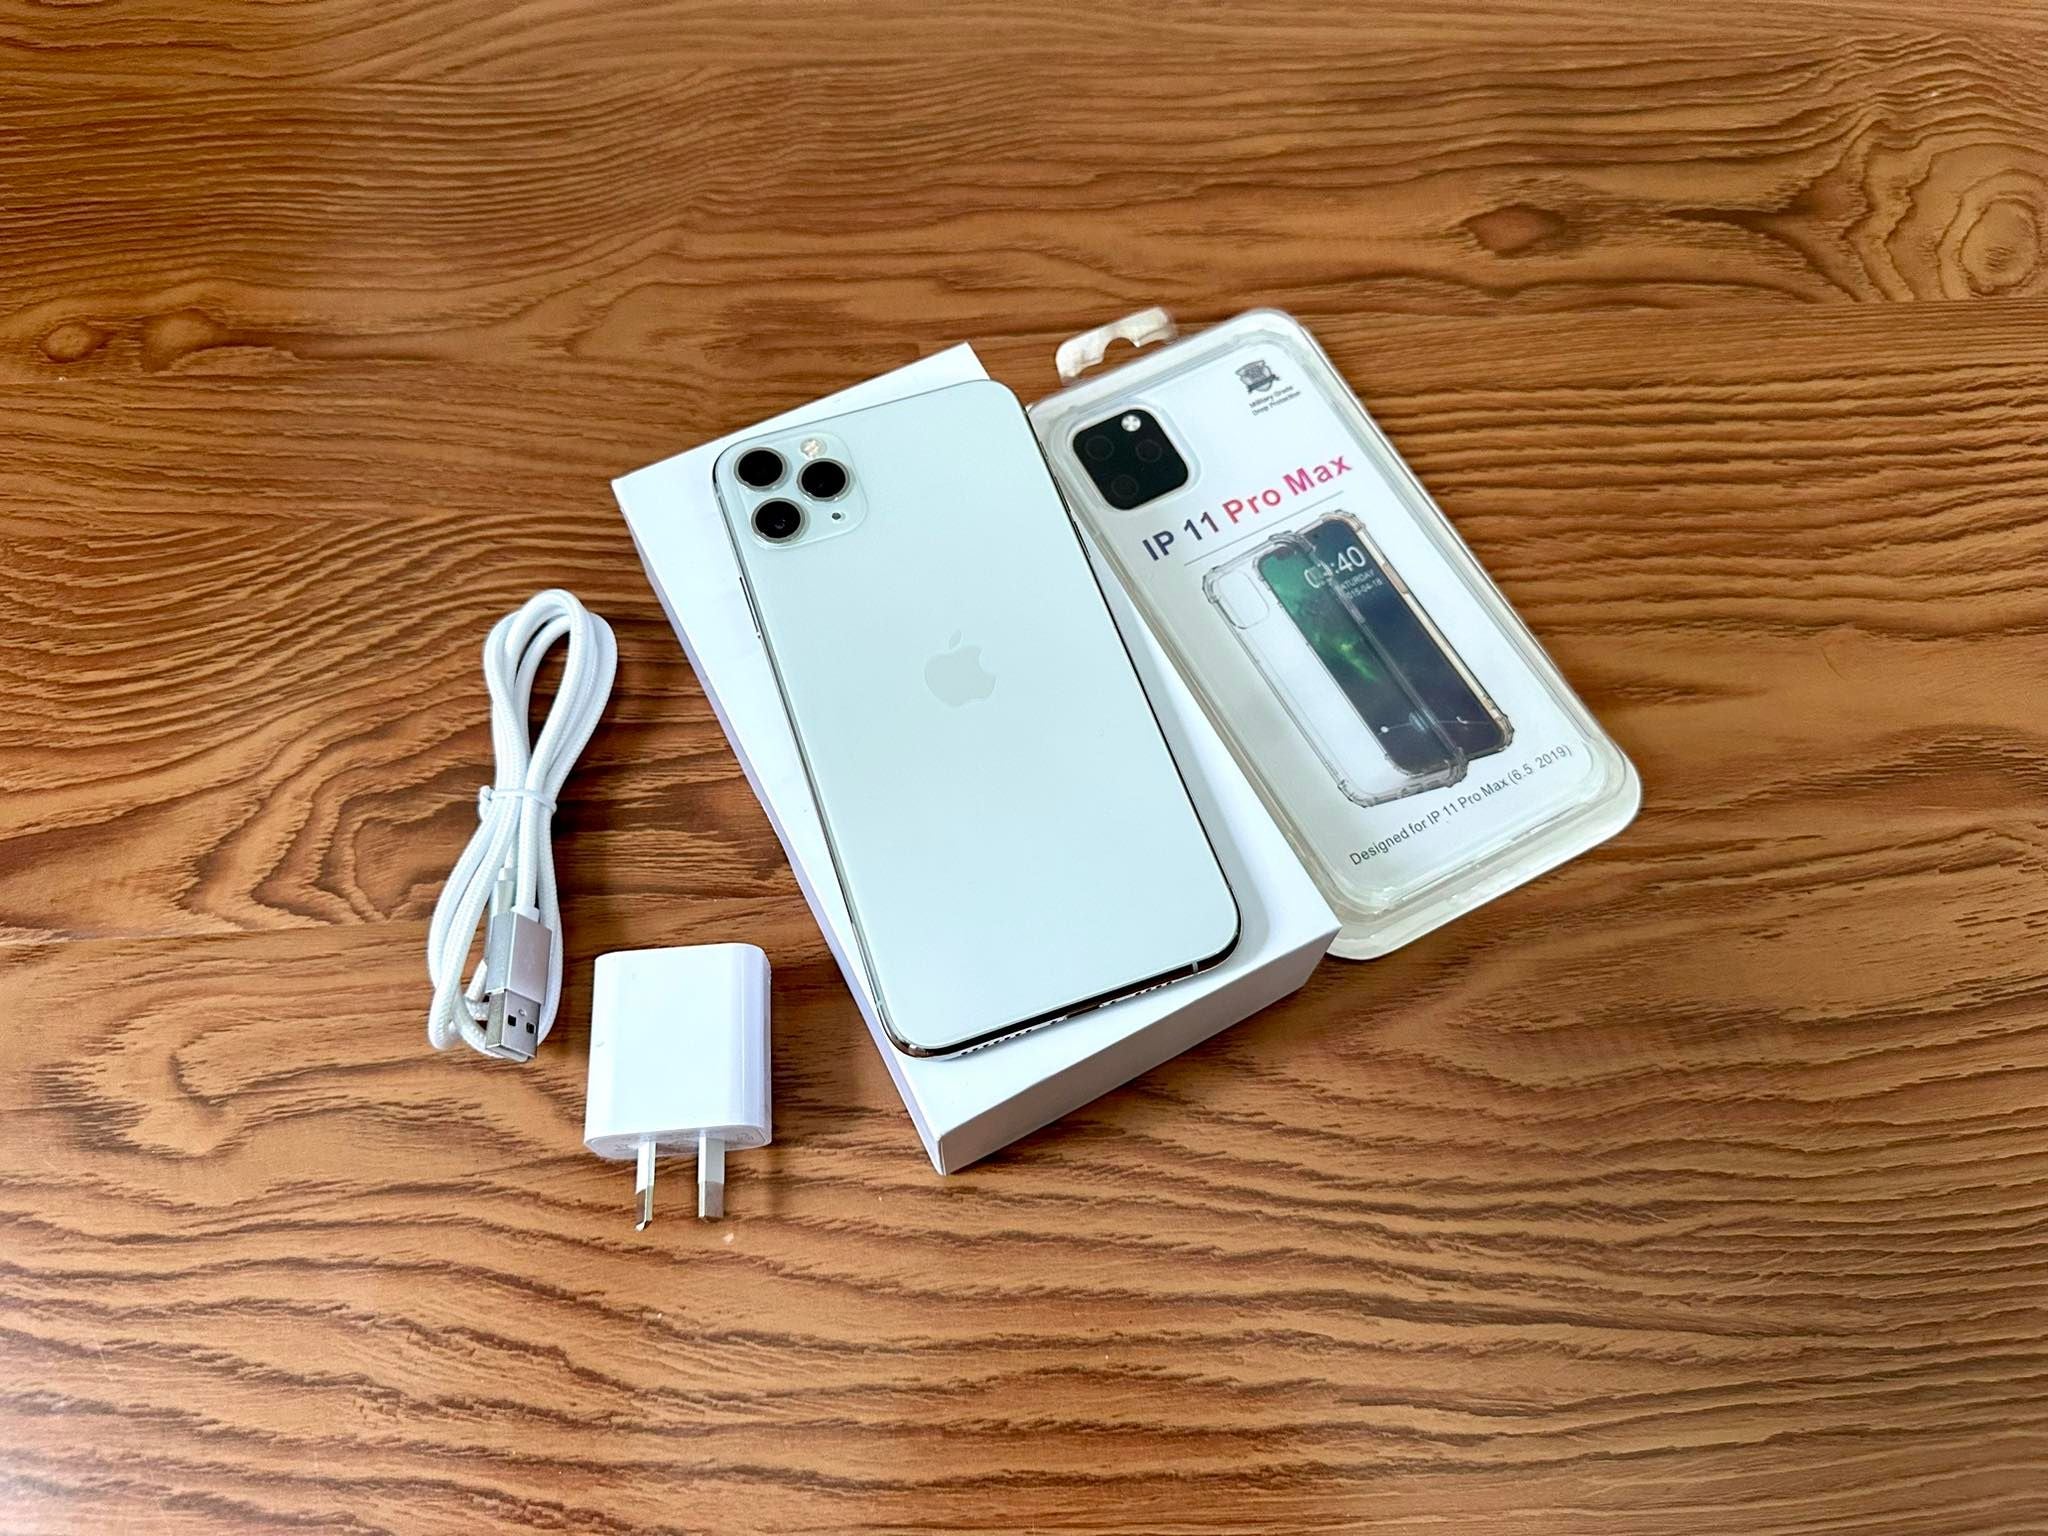 Apple iPhone 11 Pro Max 256GB Silver (Excellent) New Battery, Case, Screen Protector & Shipping